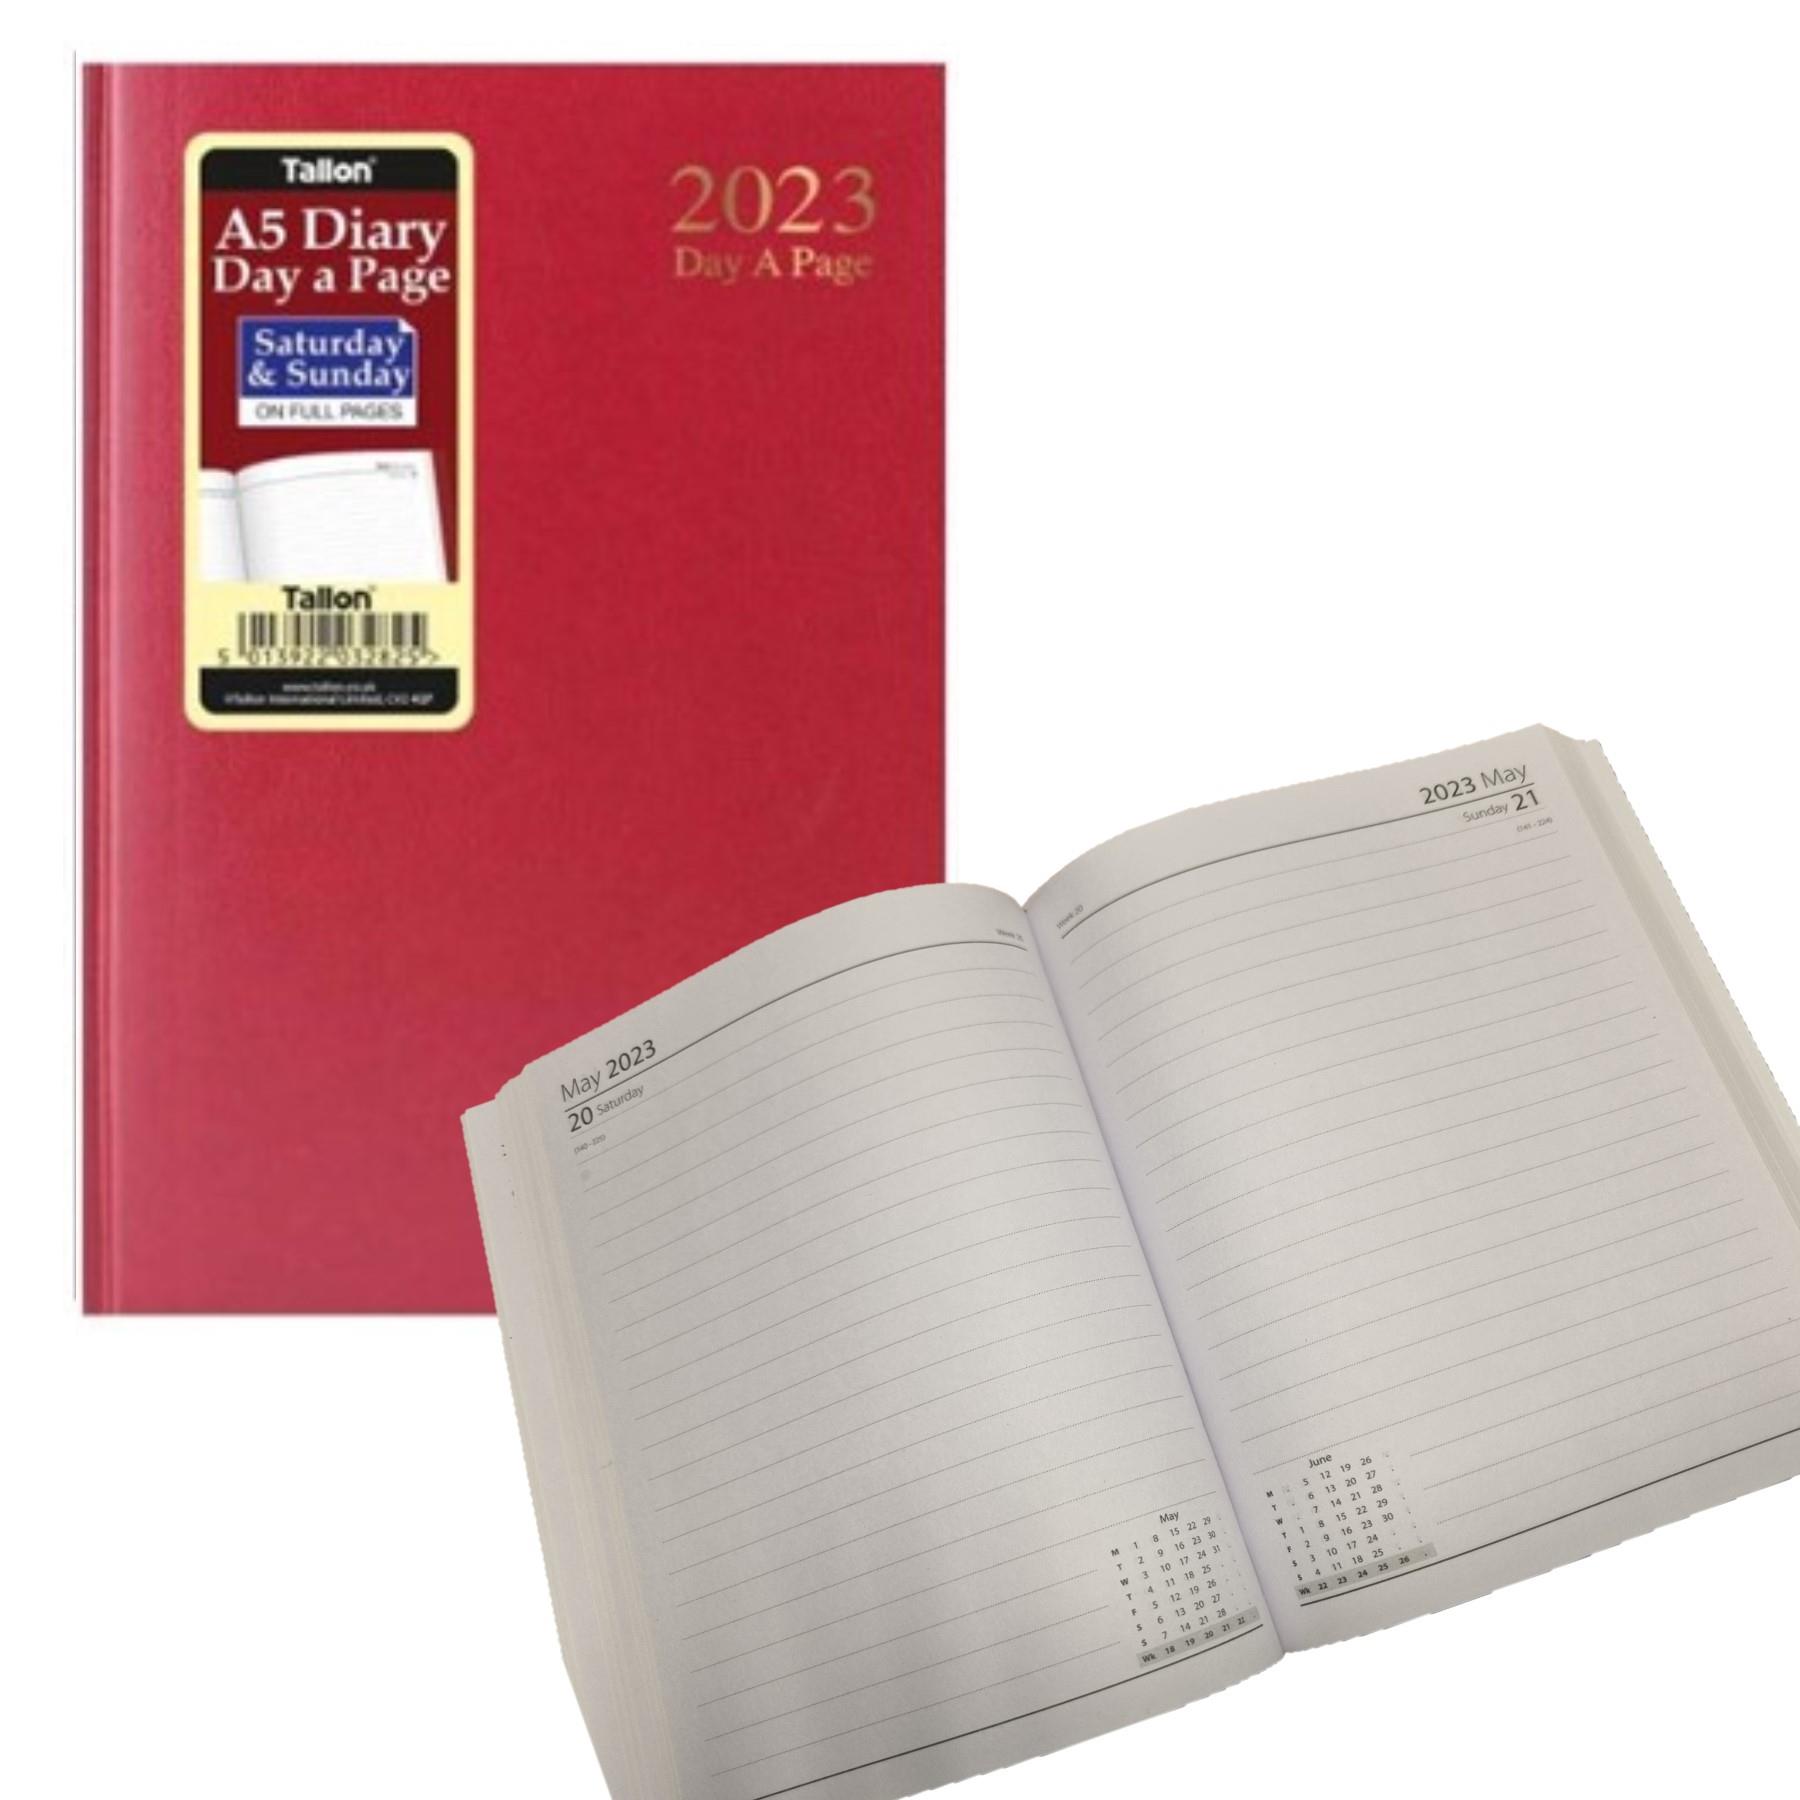 2023 A5 Hardback Day a Page FULL Sat/Sun Diary 3282 - Red